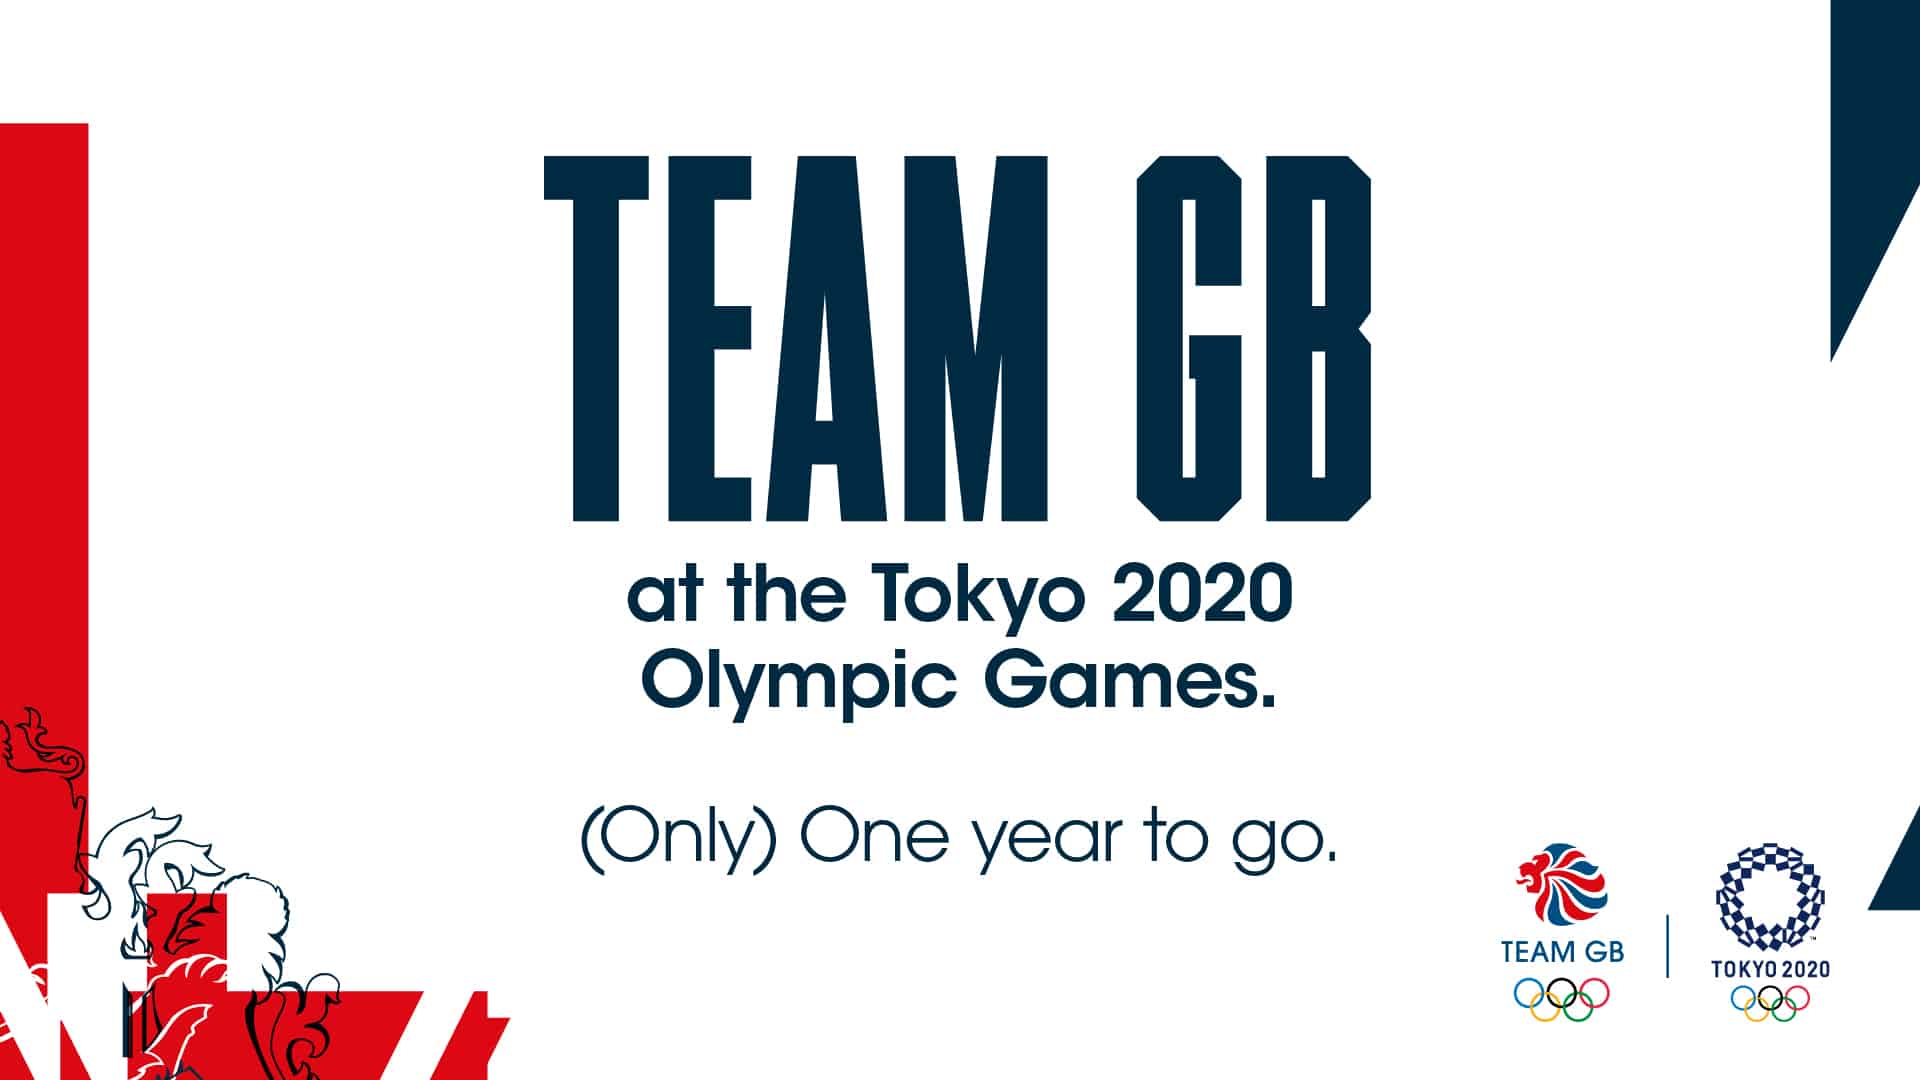 Tokyo 2020 Olympic Games (Only) One year to go!